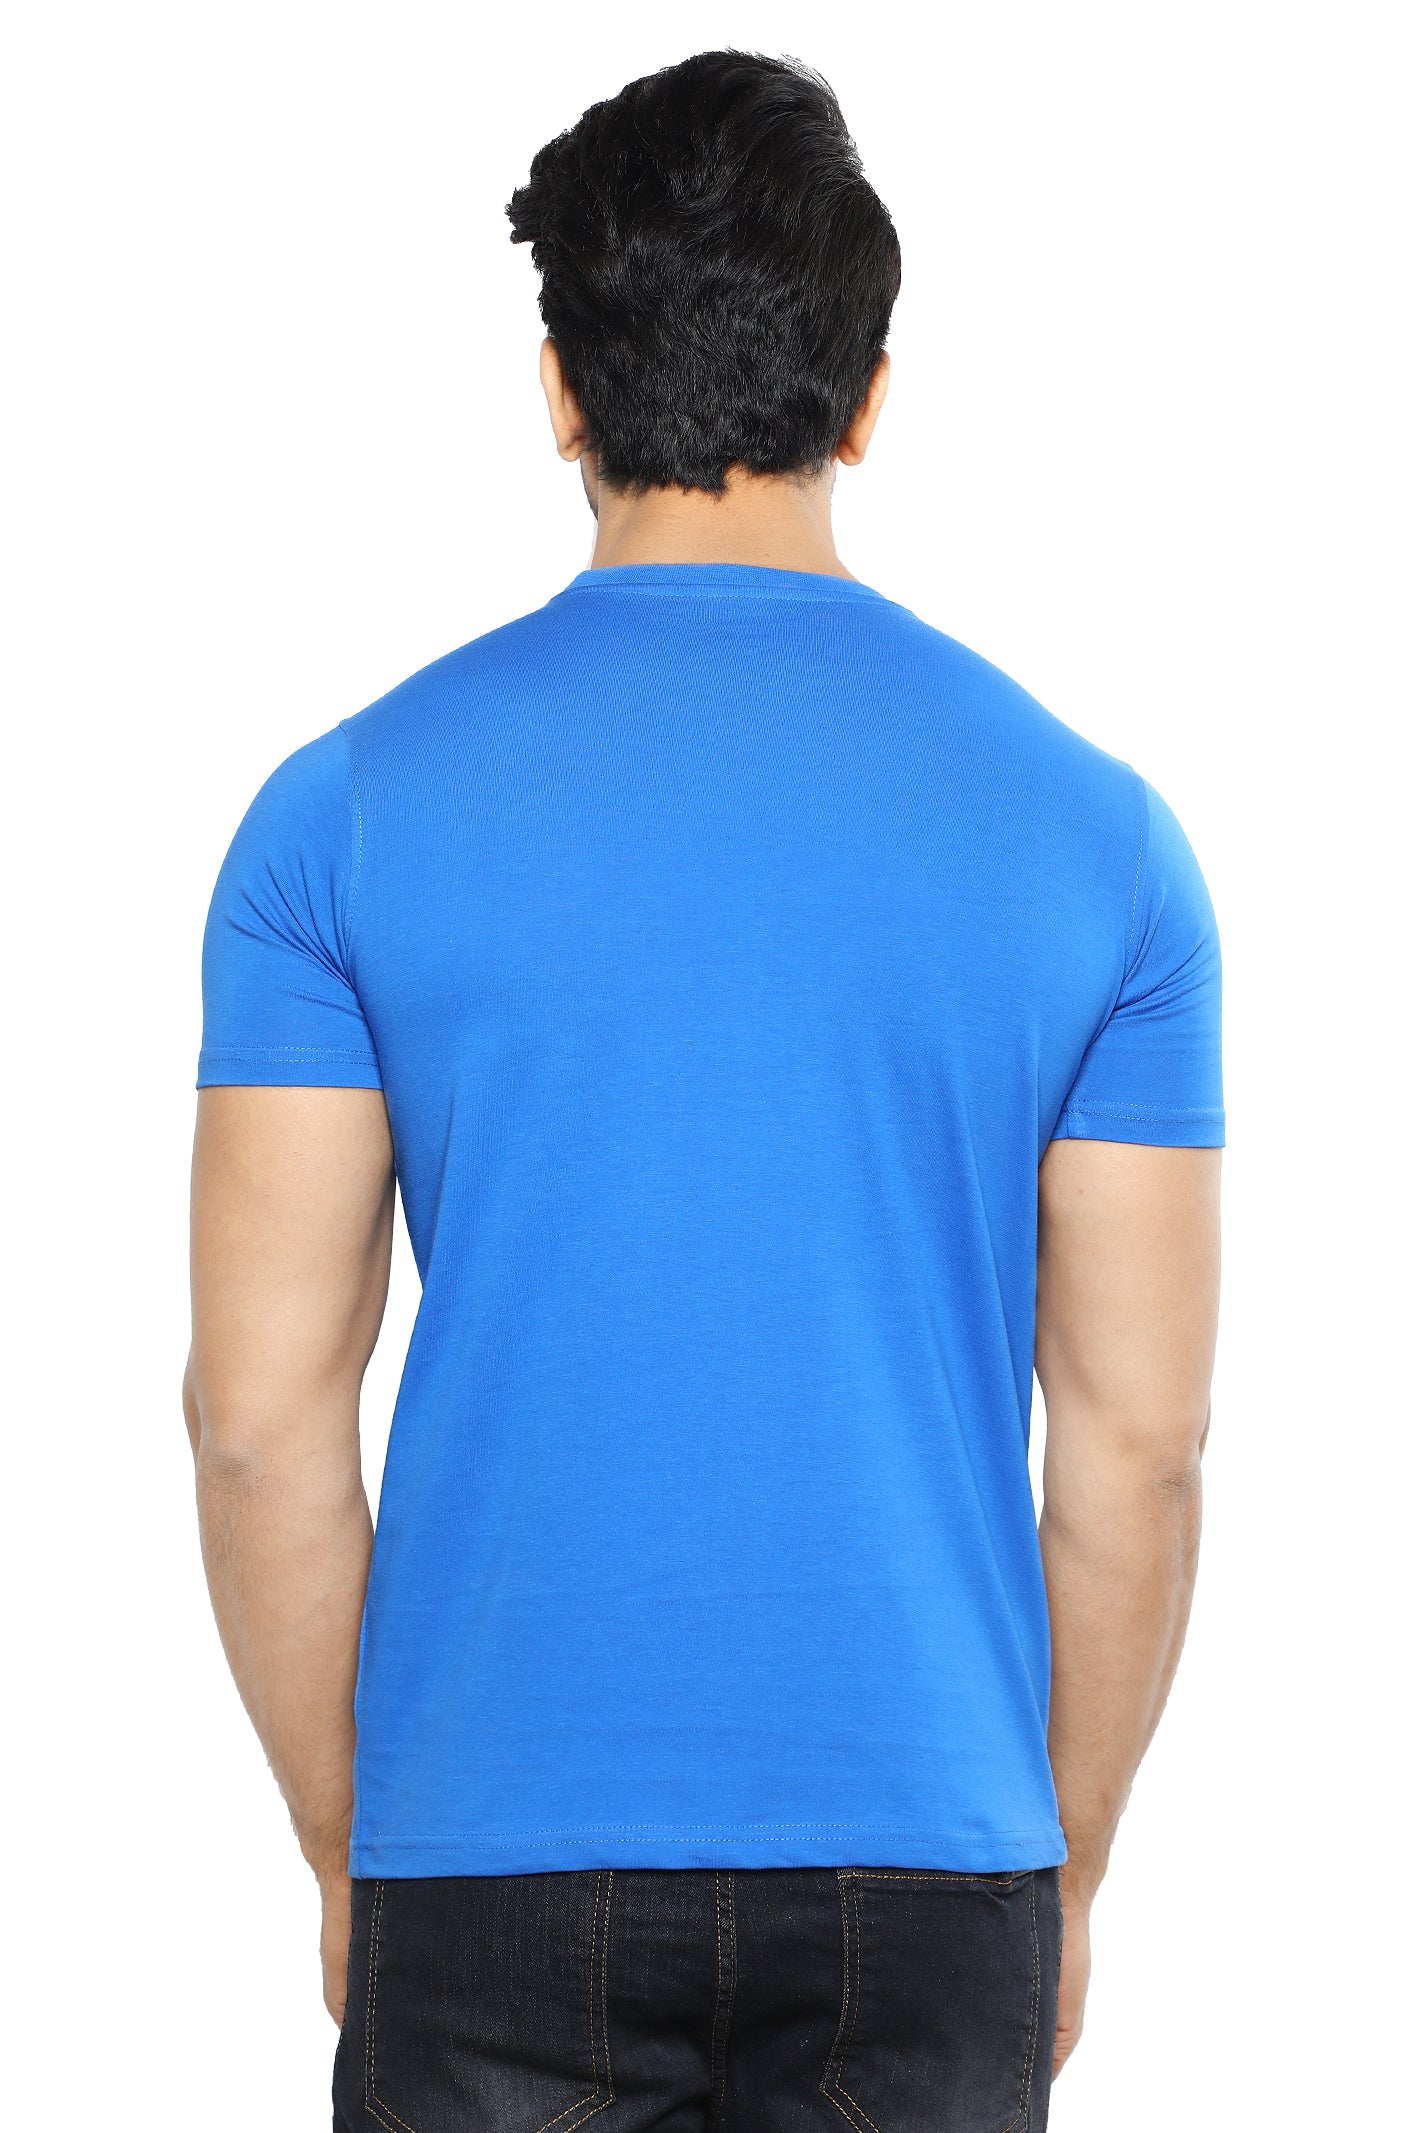 Diners Men's Round Neck T-Shirt SKU: NA815-R-BLUE - Diners